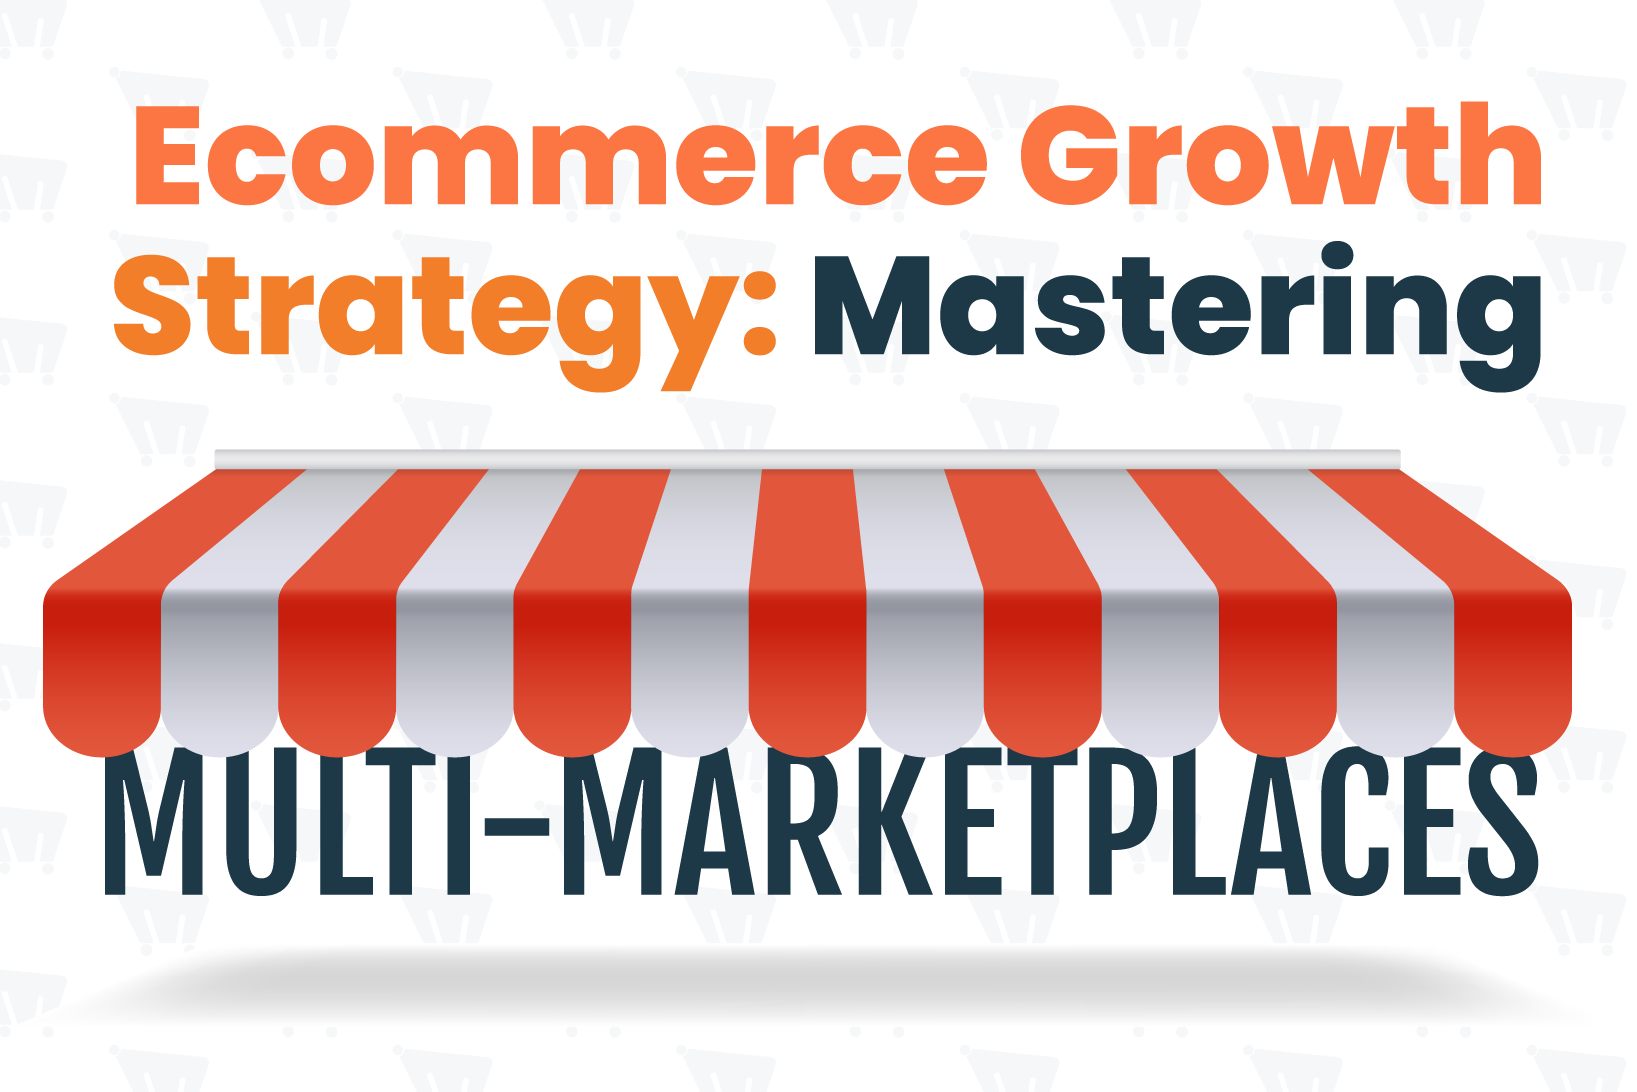 Ecommerce Growth Strategy: Mastering Multi-Marketplaces